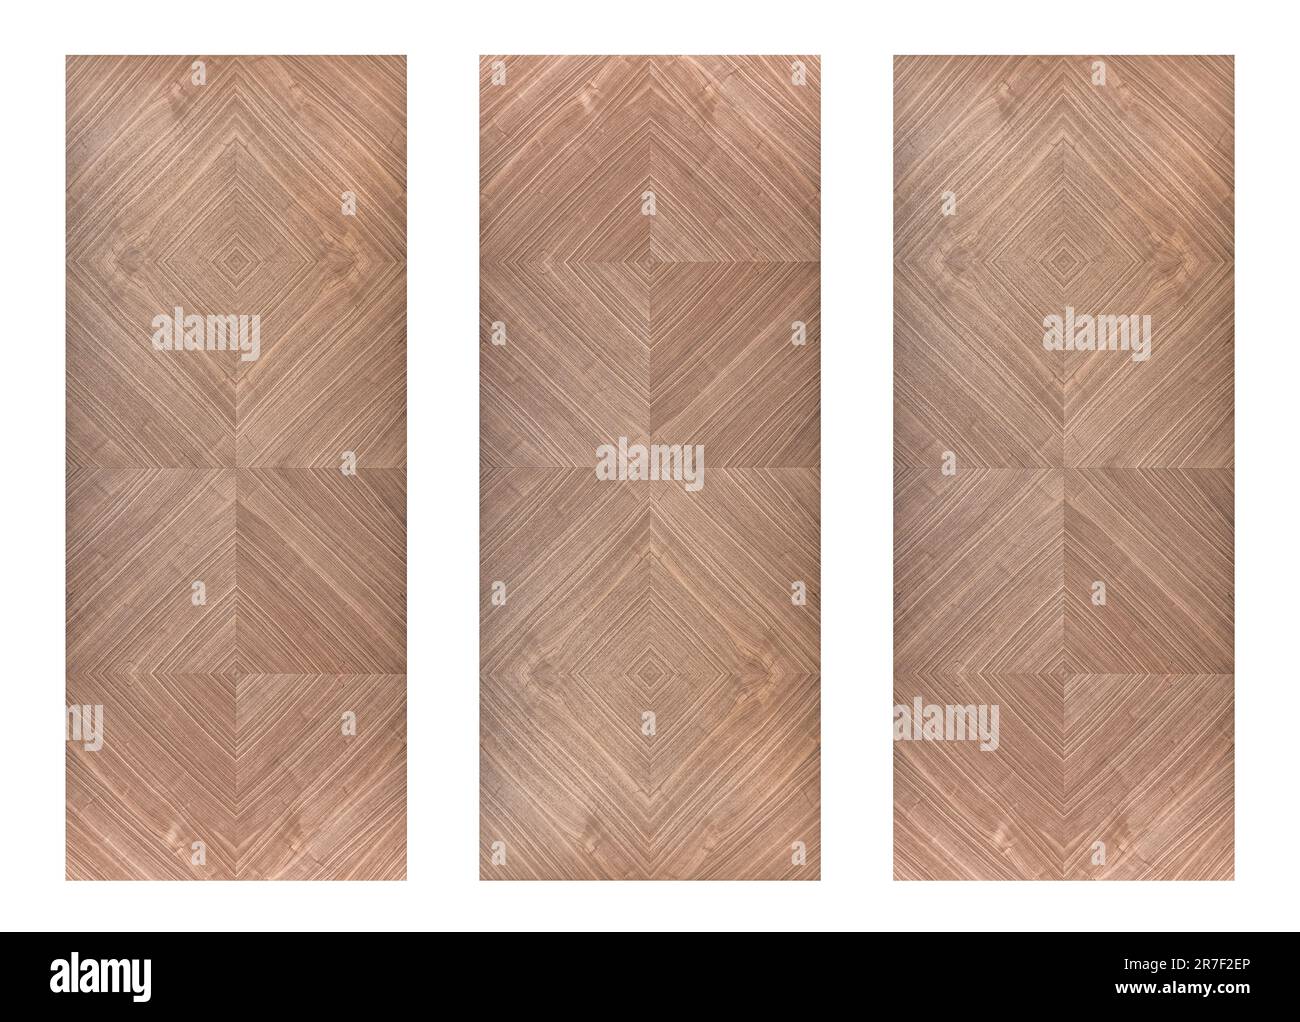 Wall panels of walnut veneer with geometric rhombic pattern isolated on white background Stock Photo